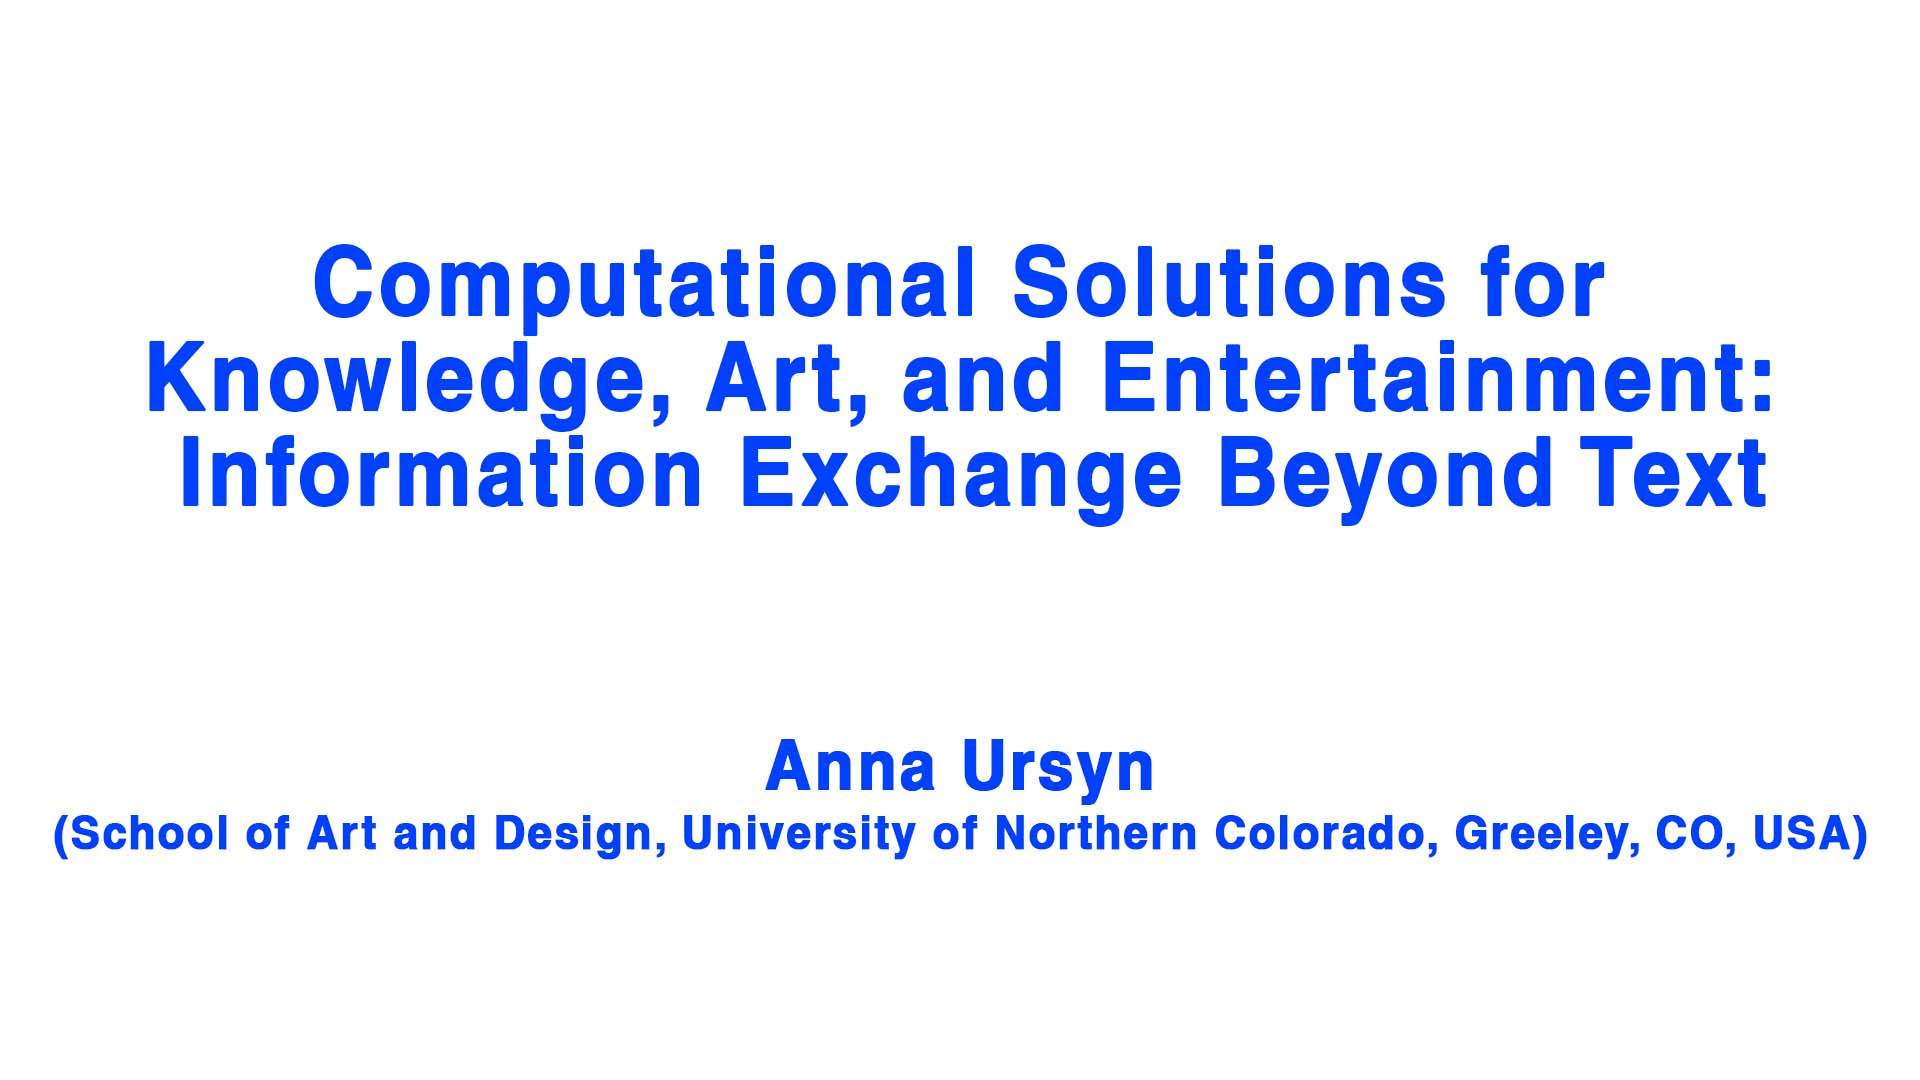 Computational Solutions for Knowledge, Art, and Entertainment: Information Exchange Beyond Text